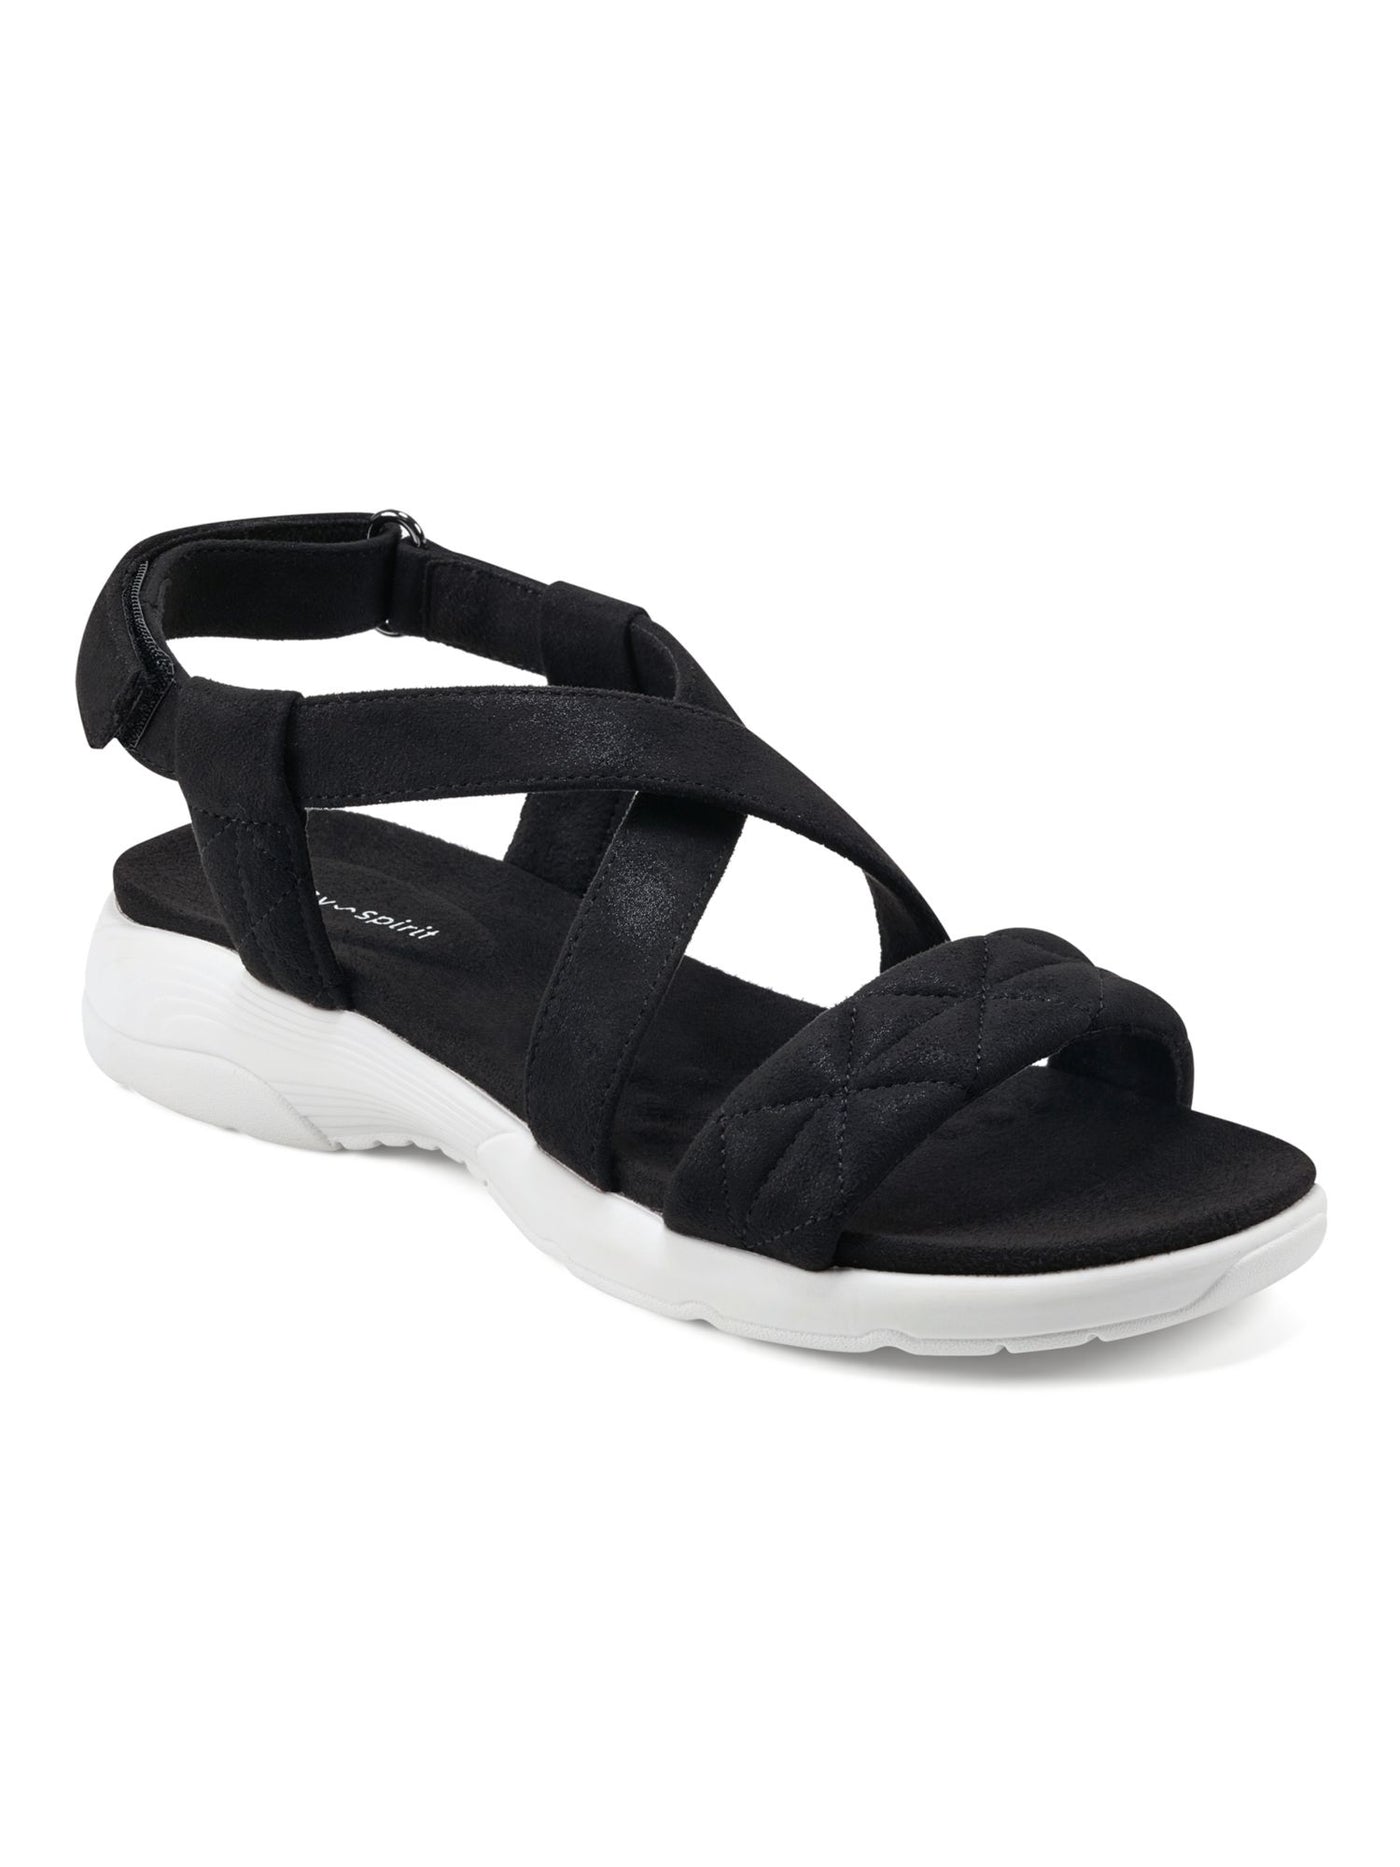 EASY SPIRIT Womens Black Cushioned Strappy Treasur Round Toe Wedge Sandals Shoes 6.5 M